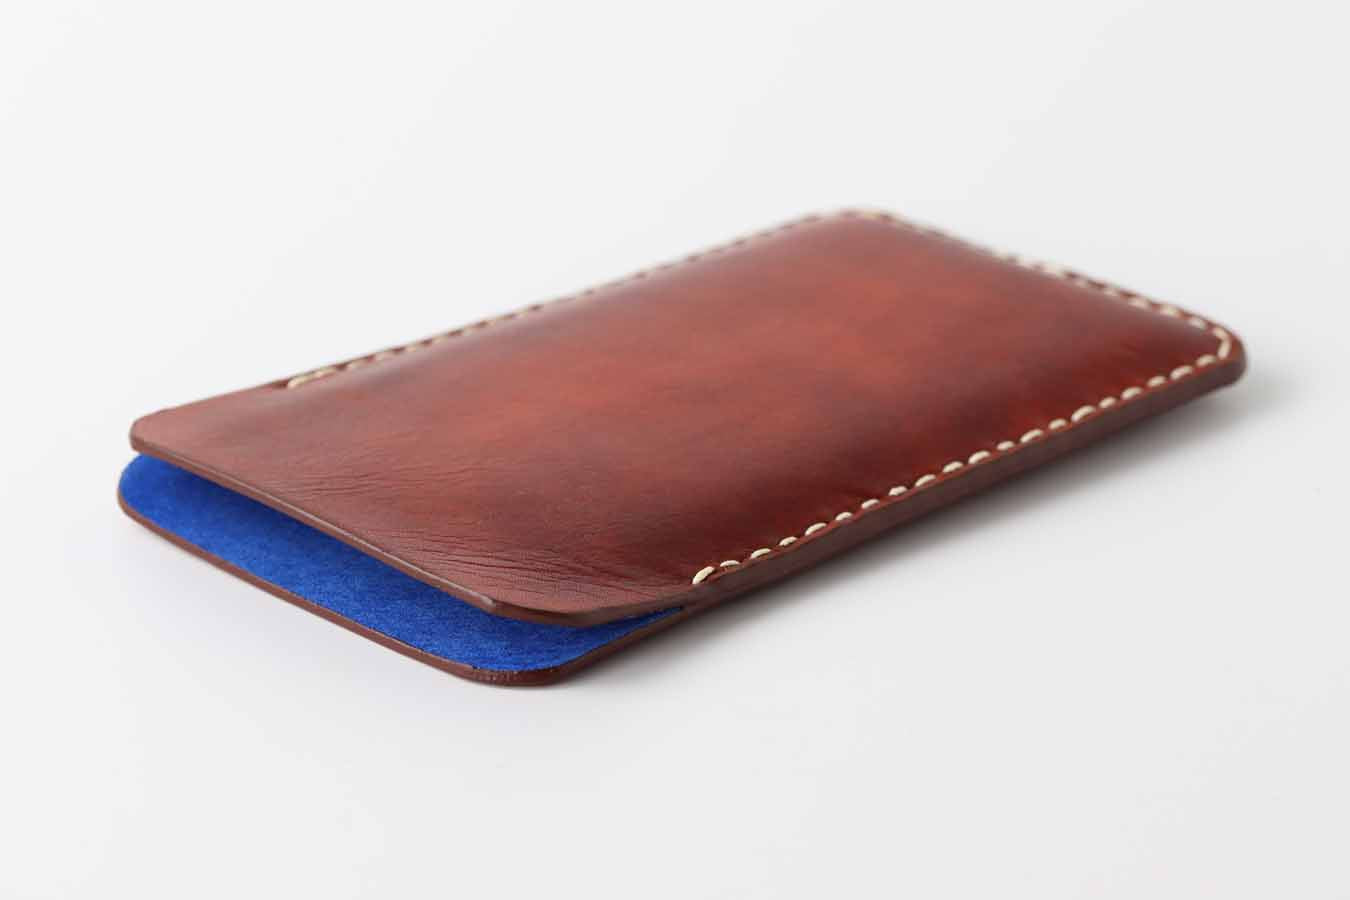 All Leather Phone Cases / Covers / Sleeves